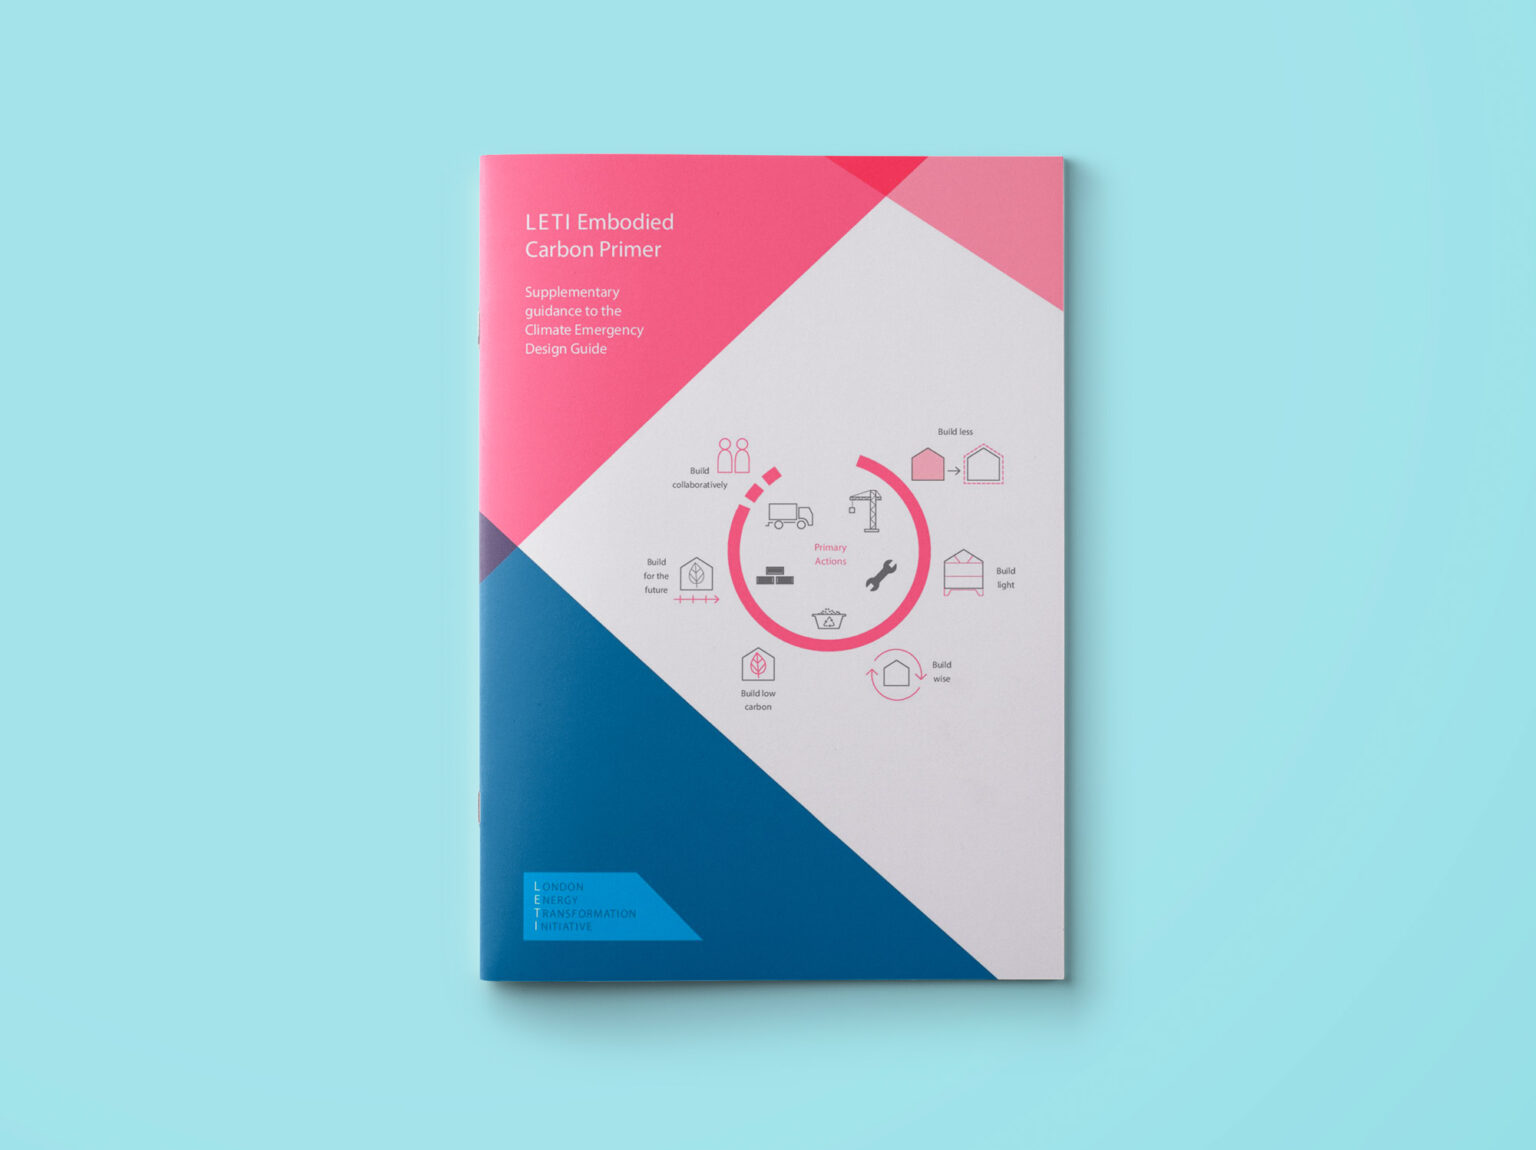 Some of our youngest team members have been crucially involved in the creation of the Climate Emergency Design Guide and Embodied Carbon Primer documents; both recently launched and well received by the industry.